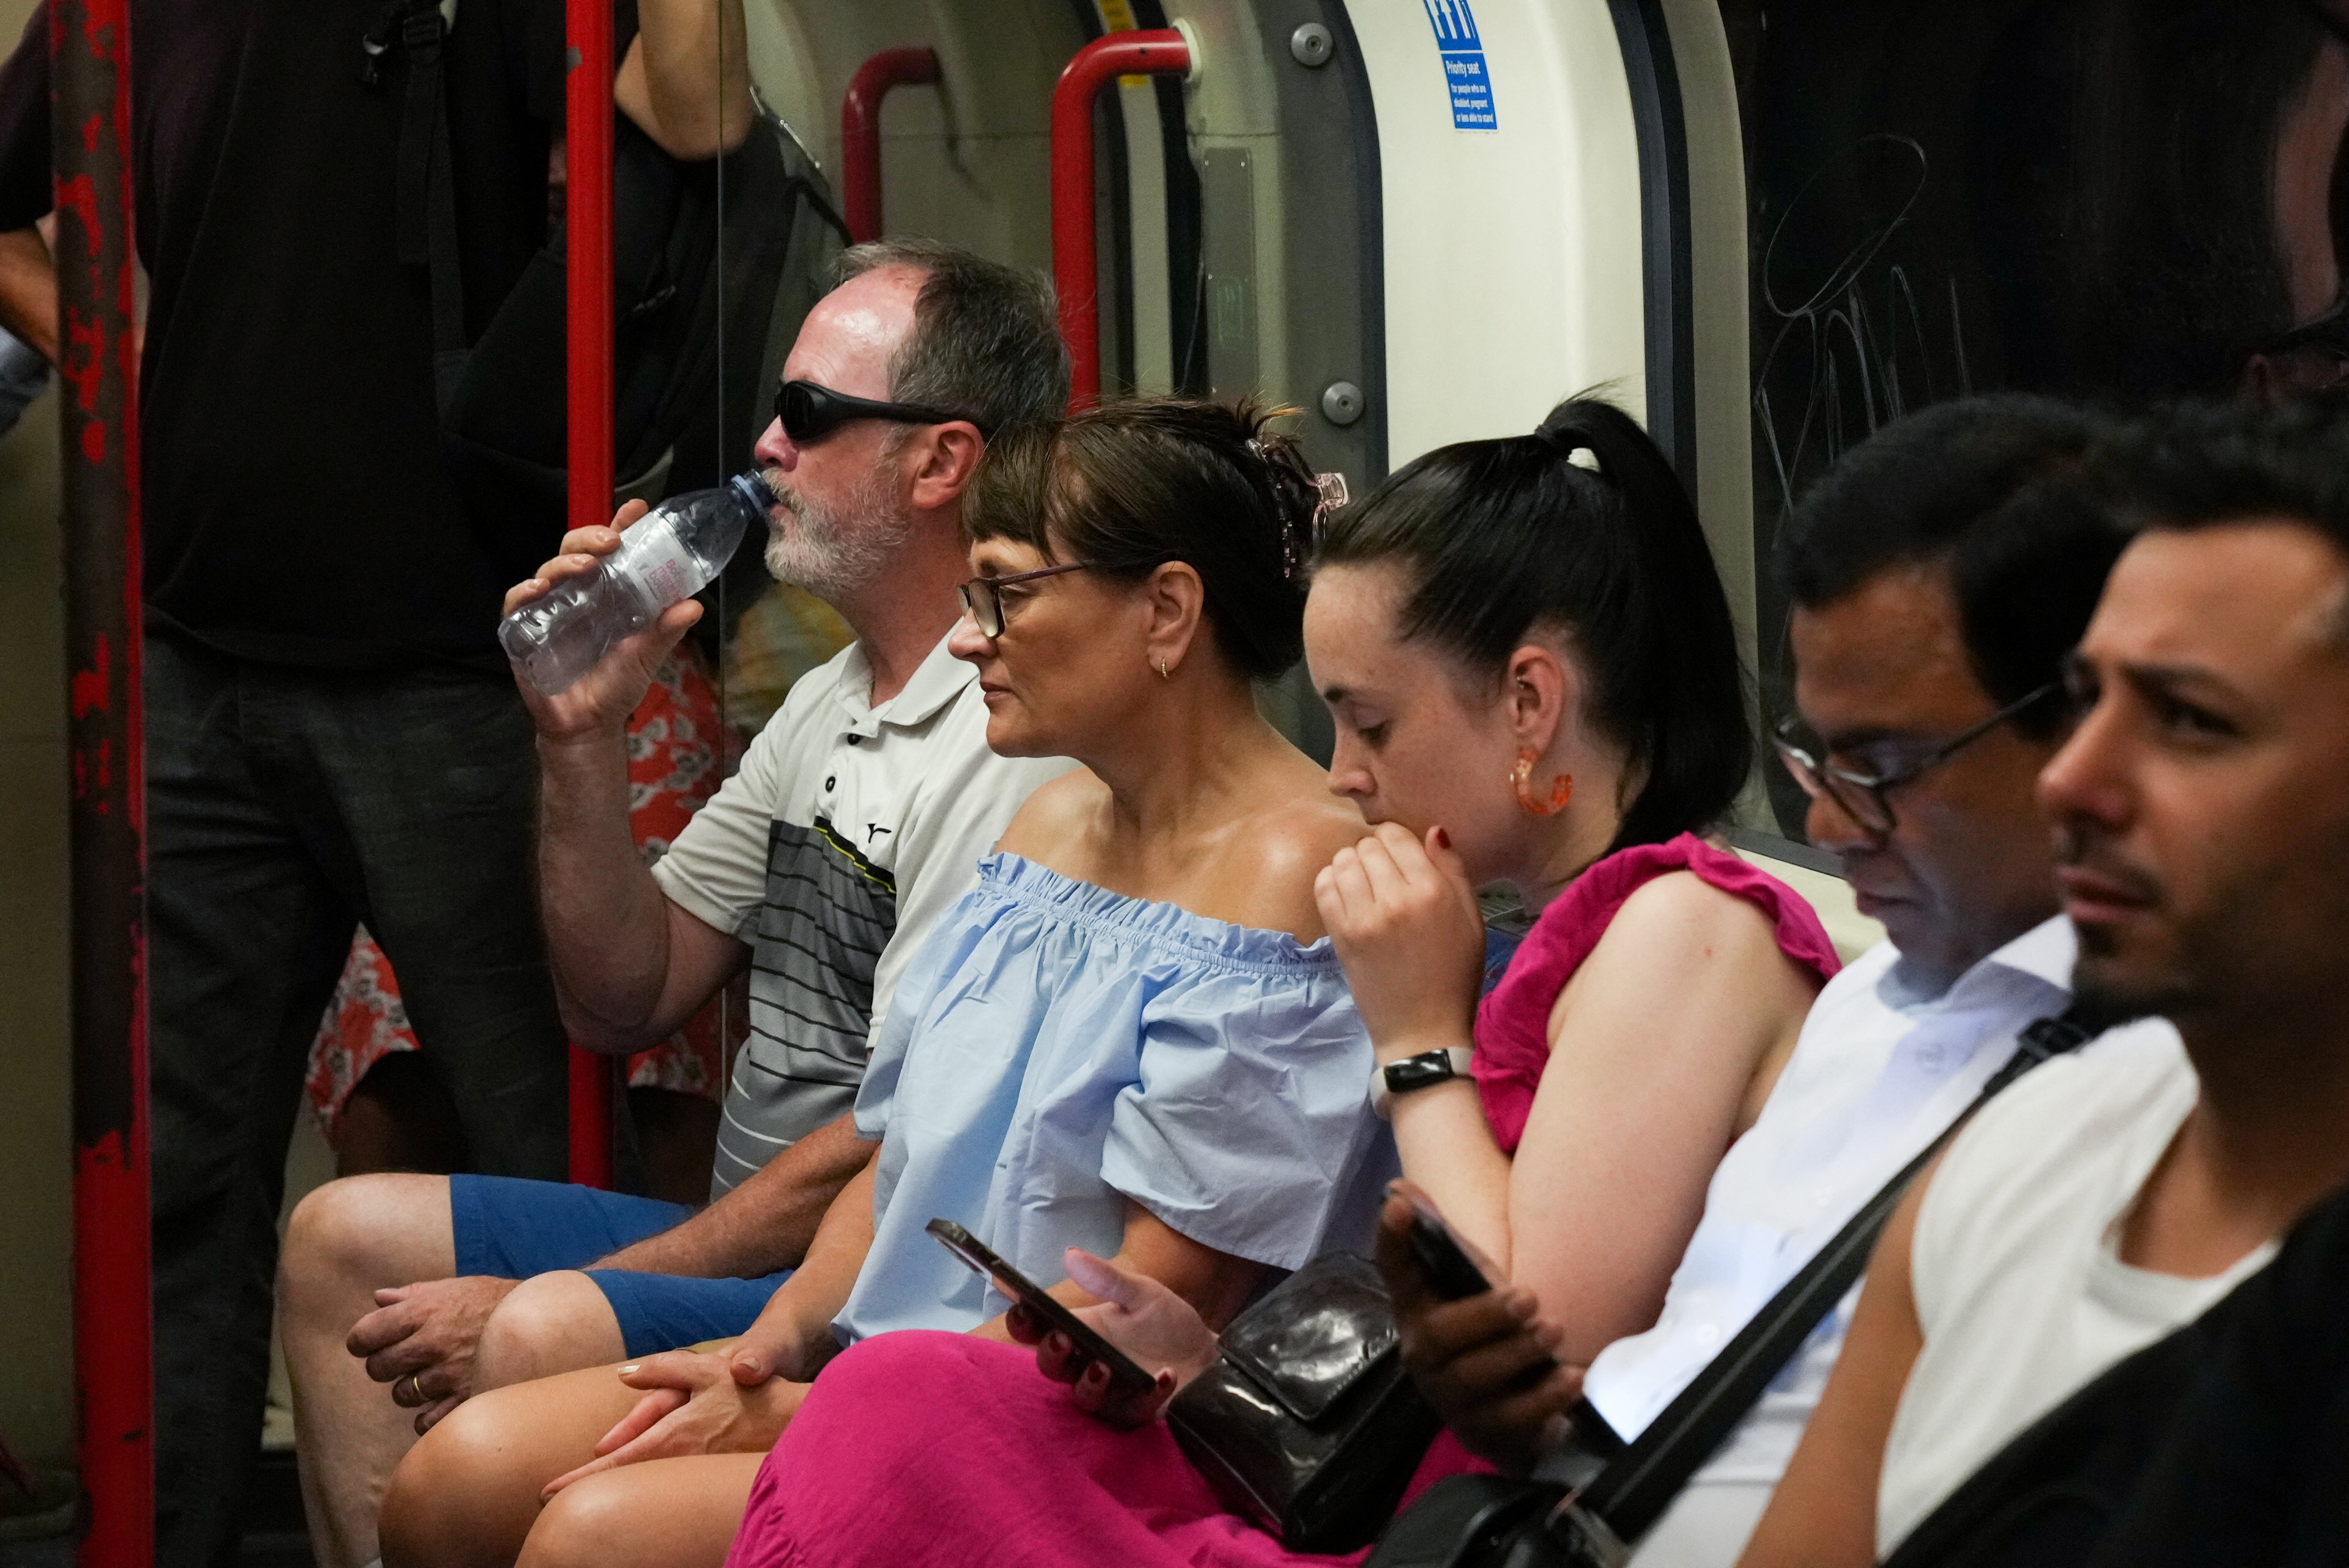 Commuters travel on the London Underground during a heatwave in London on Monday.